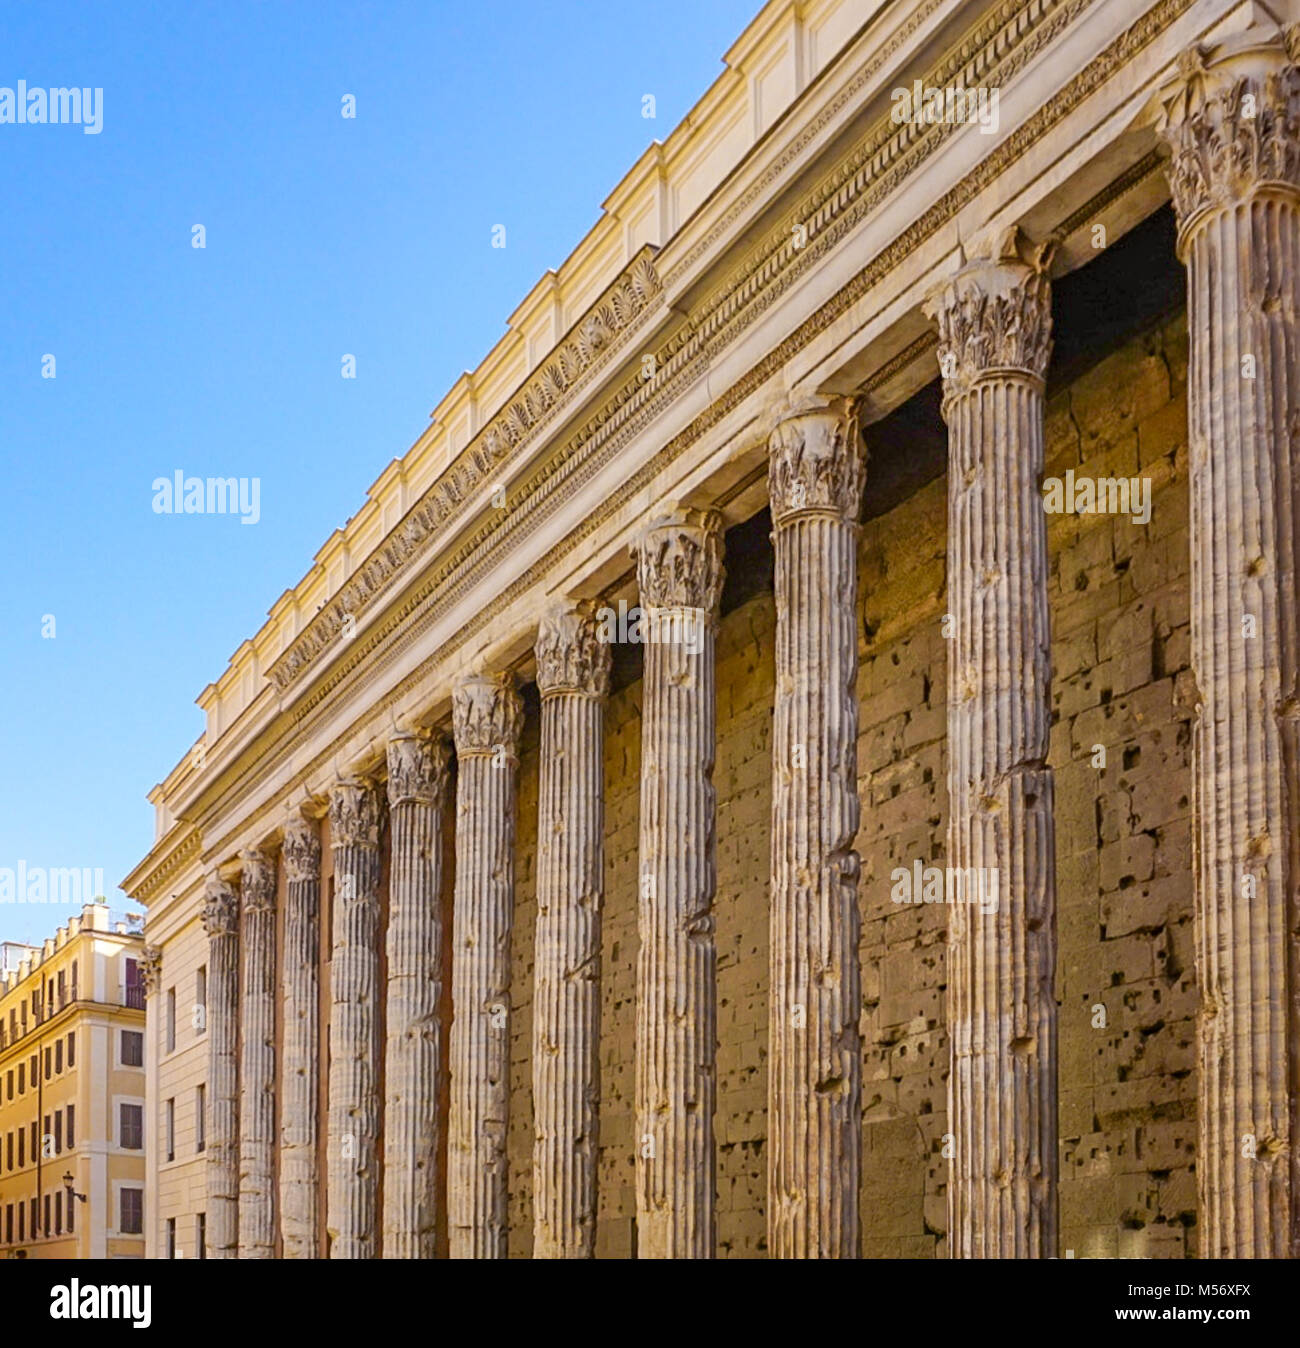 The Exterior of the Pantheon in Rome, Italy Stock Photo